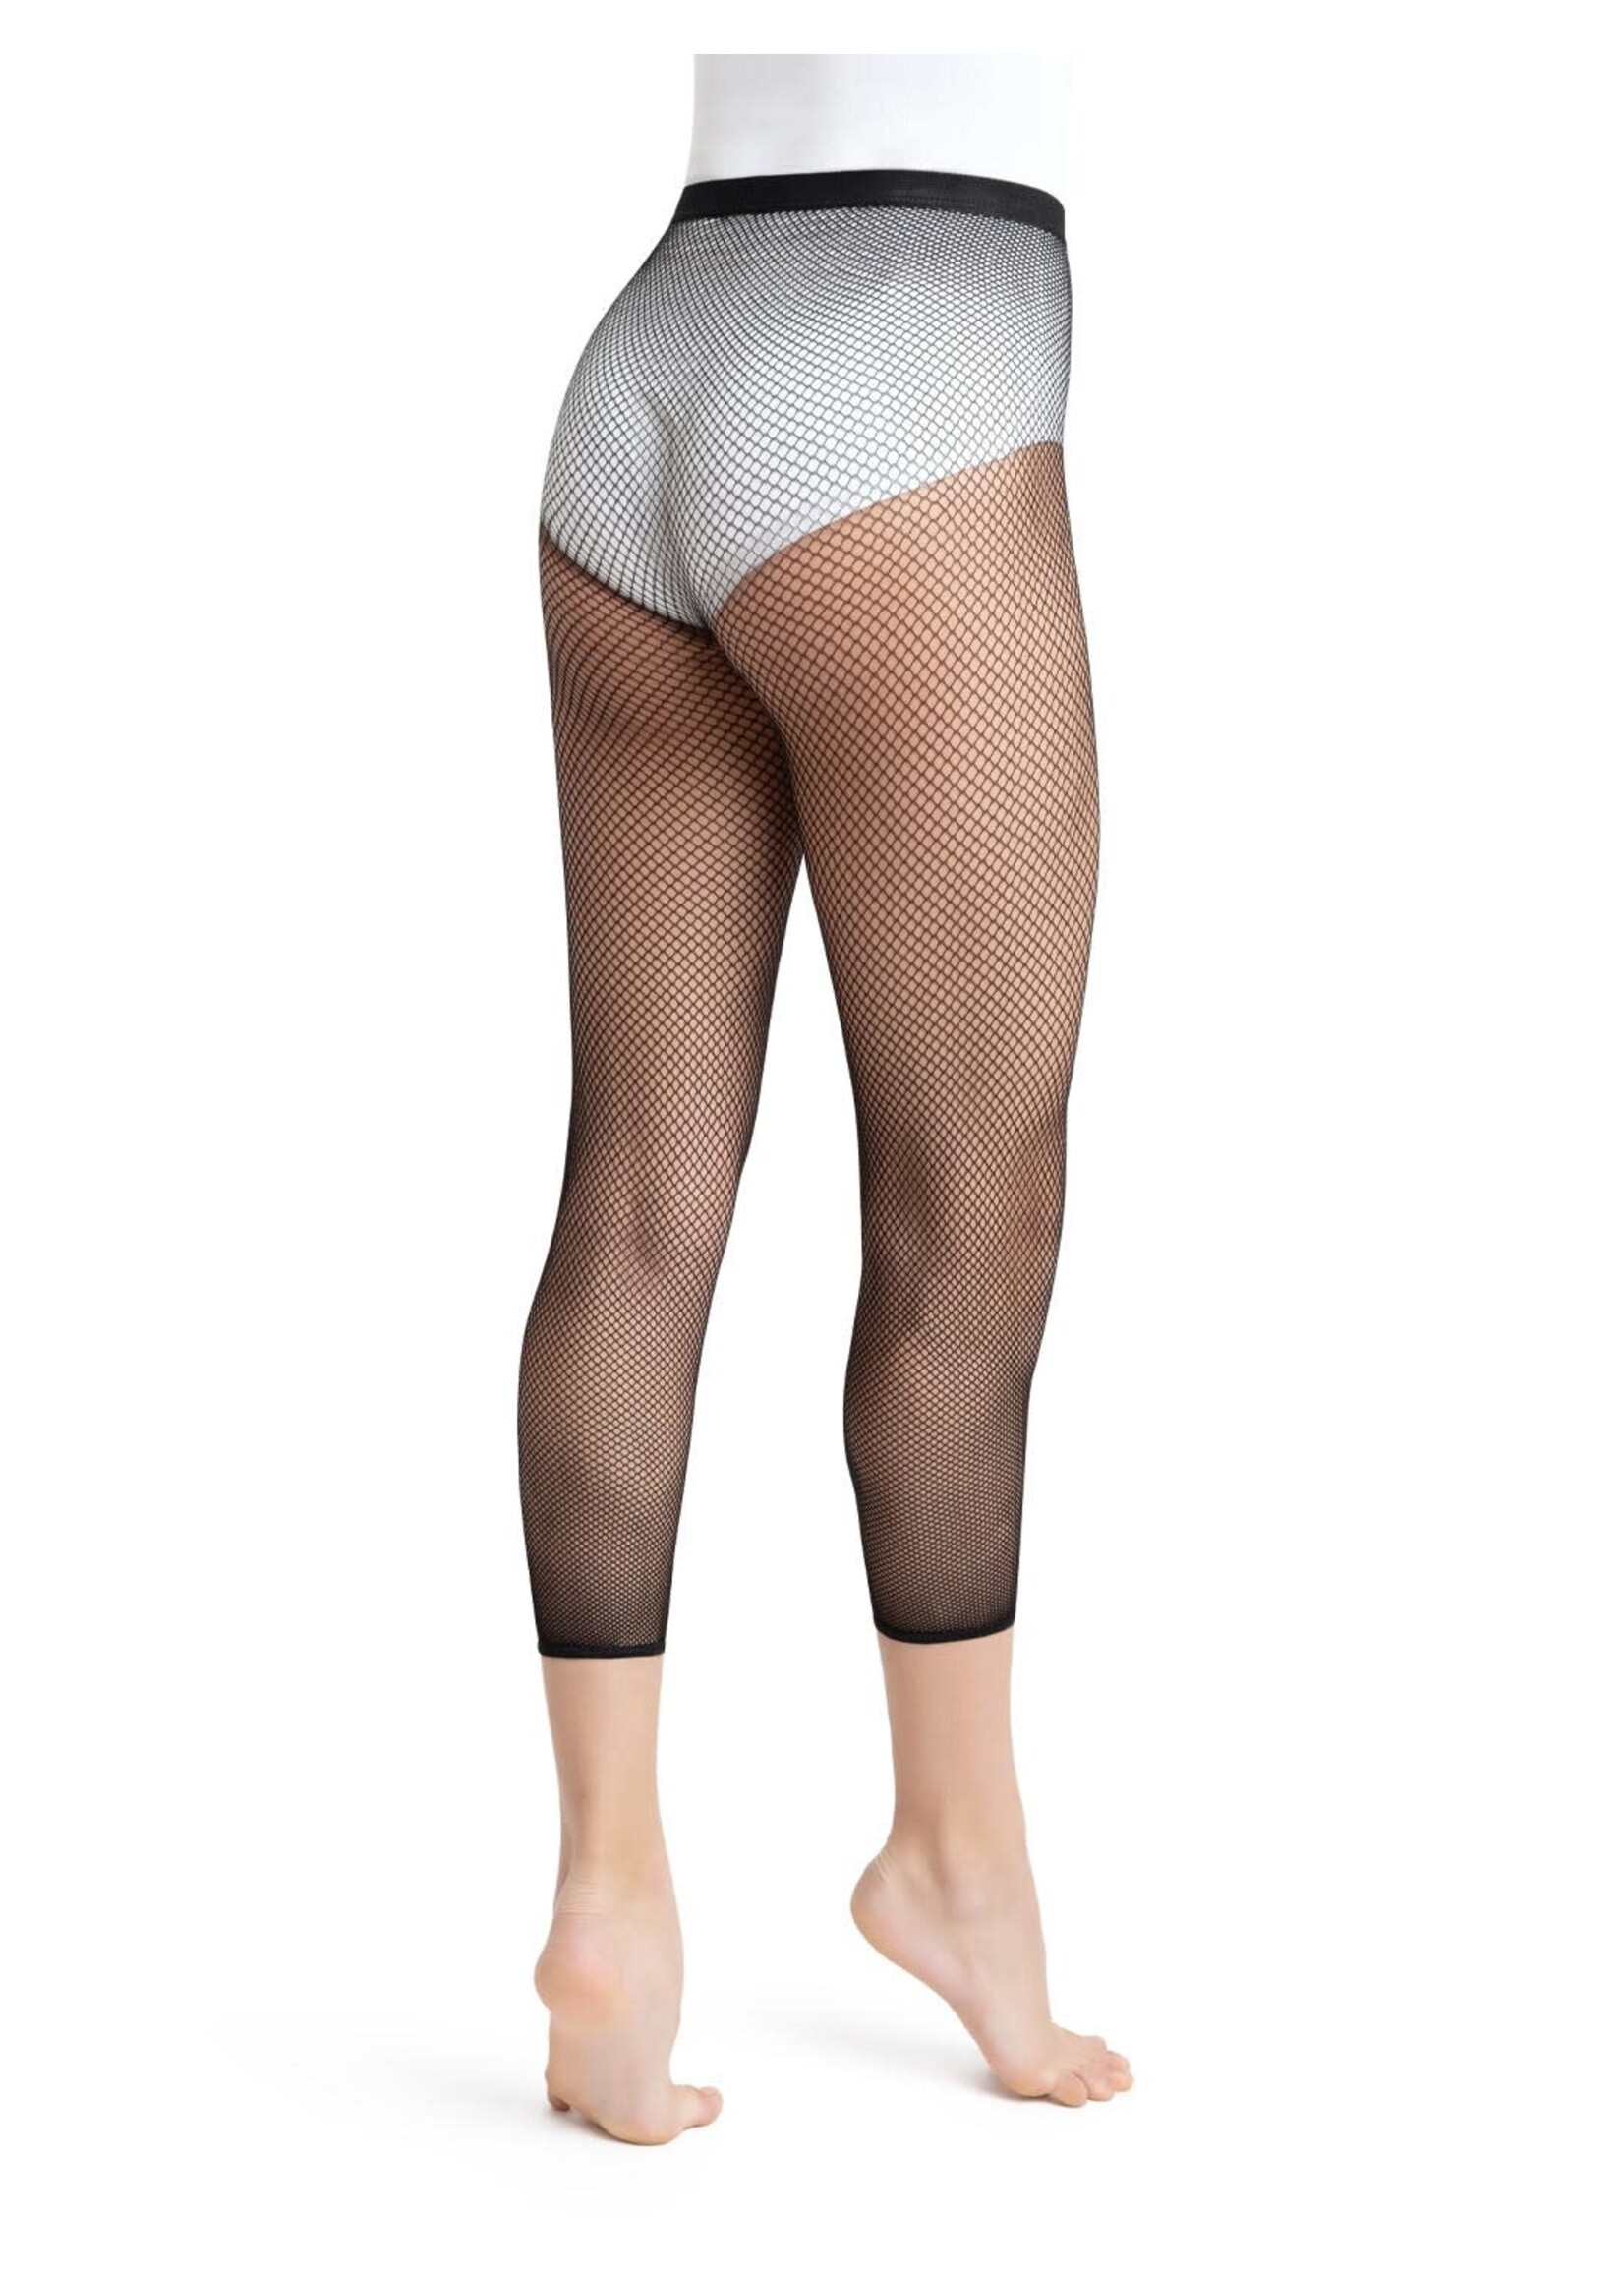 Women's Dance Tights, Fishnets, Footless Tights & more